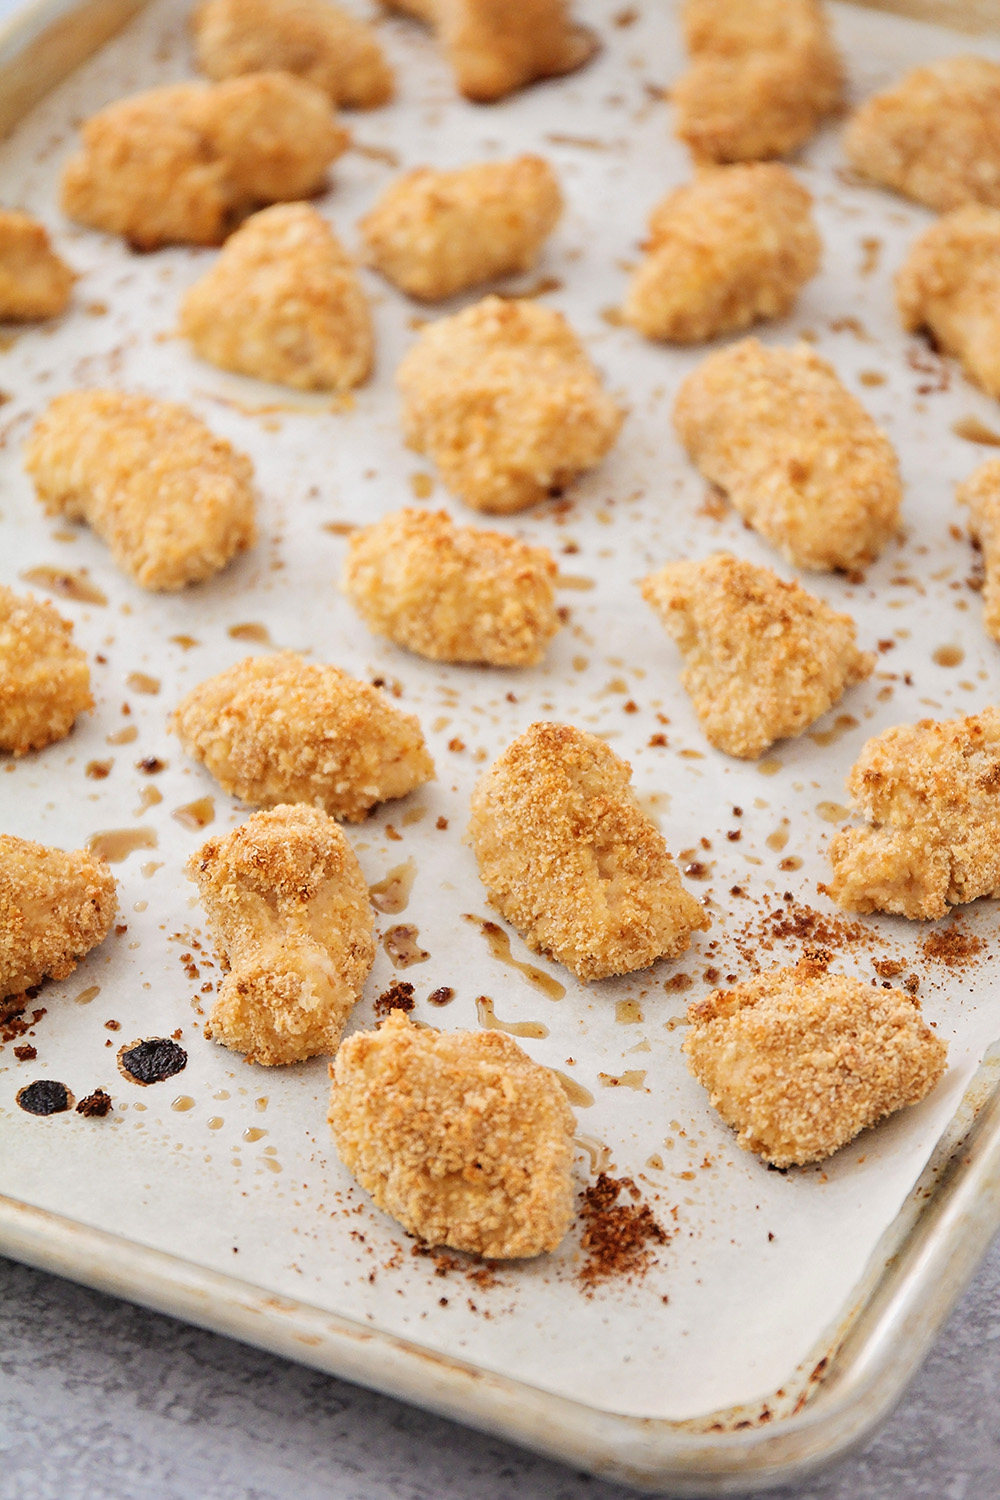 These crispy baked chicken nuggets are way healthier than fast food, and way more delicious!